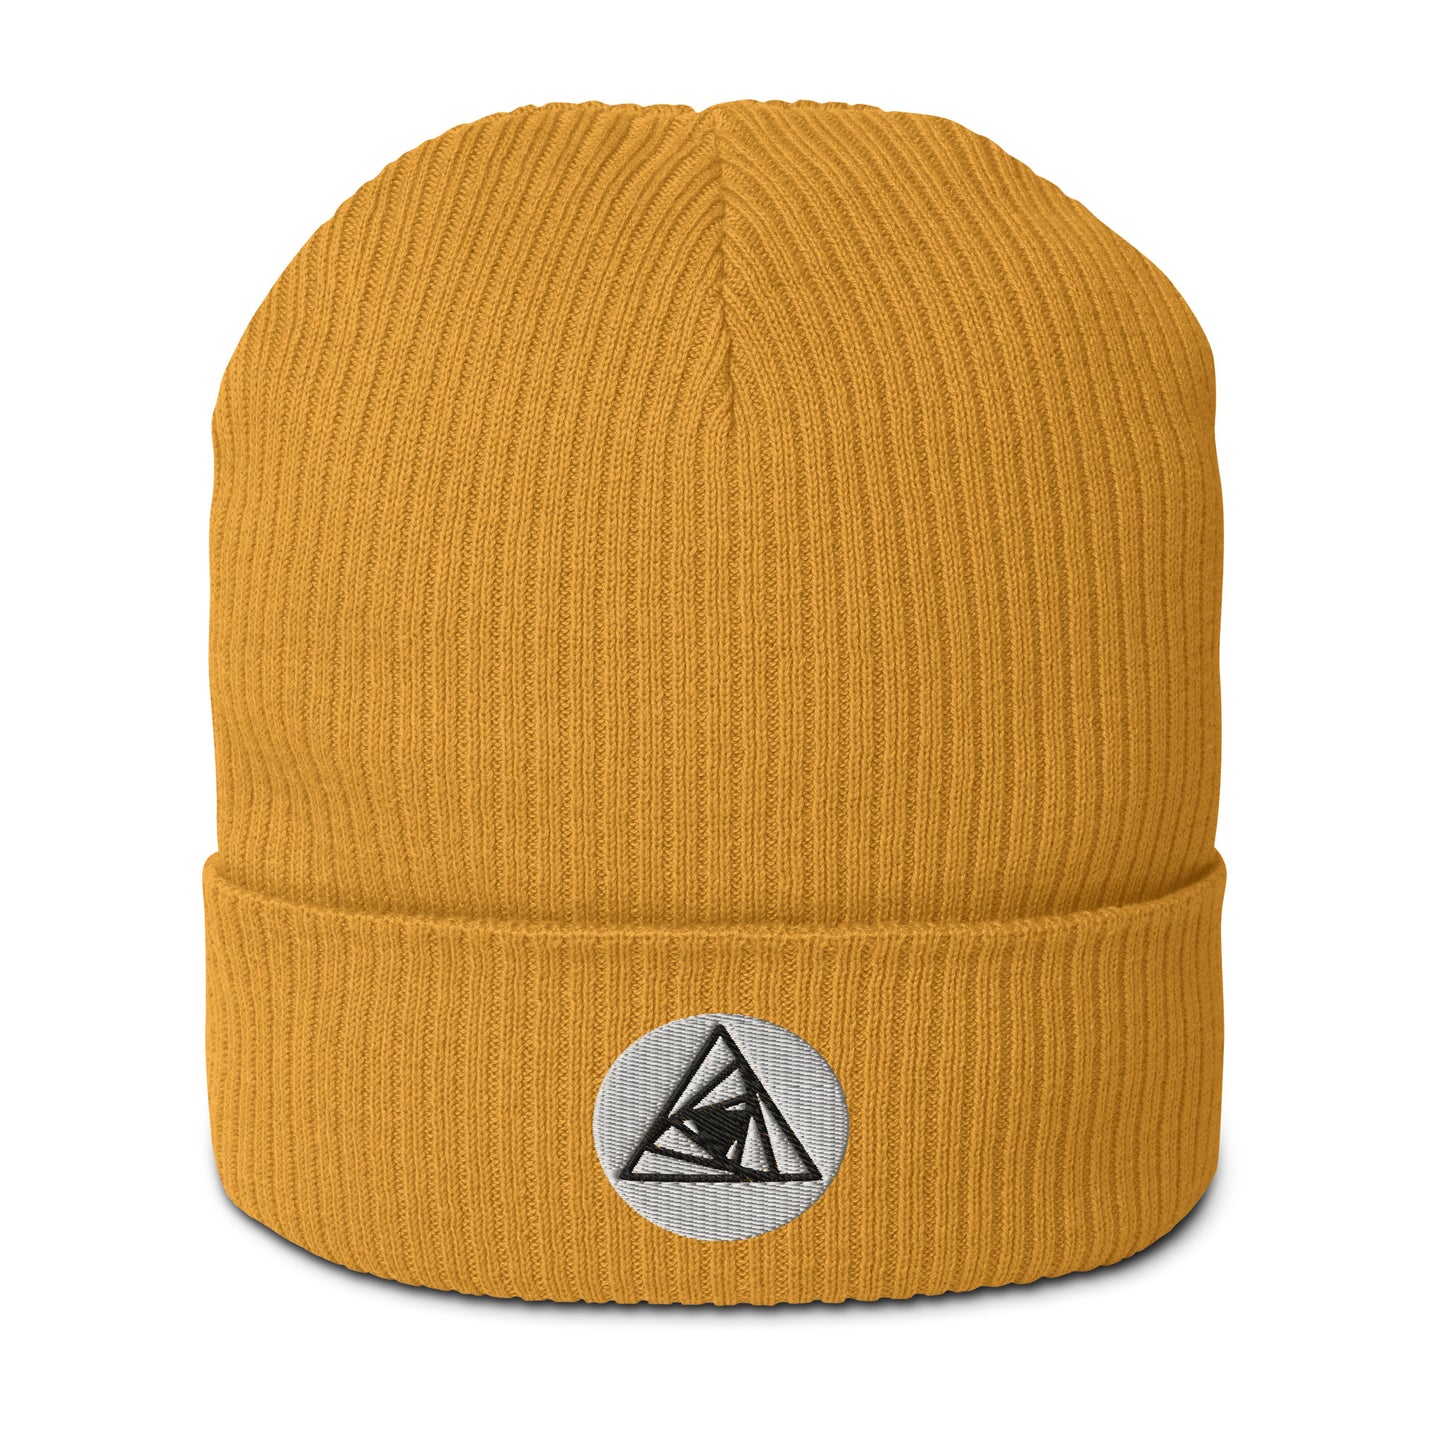 Behold, our Spiraling Equilateral Triangles Beanie in Mustard Yellow  —a garment of cosmic significance. Crafted from organic cotton and adorned with a mesmerizing Spiraling Equilateral Triangles embroidery, it's not your run-of-the-mill hat. 